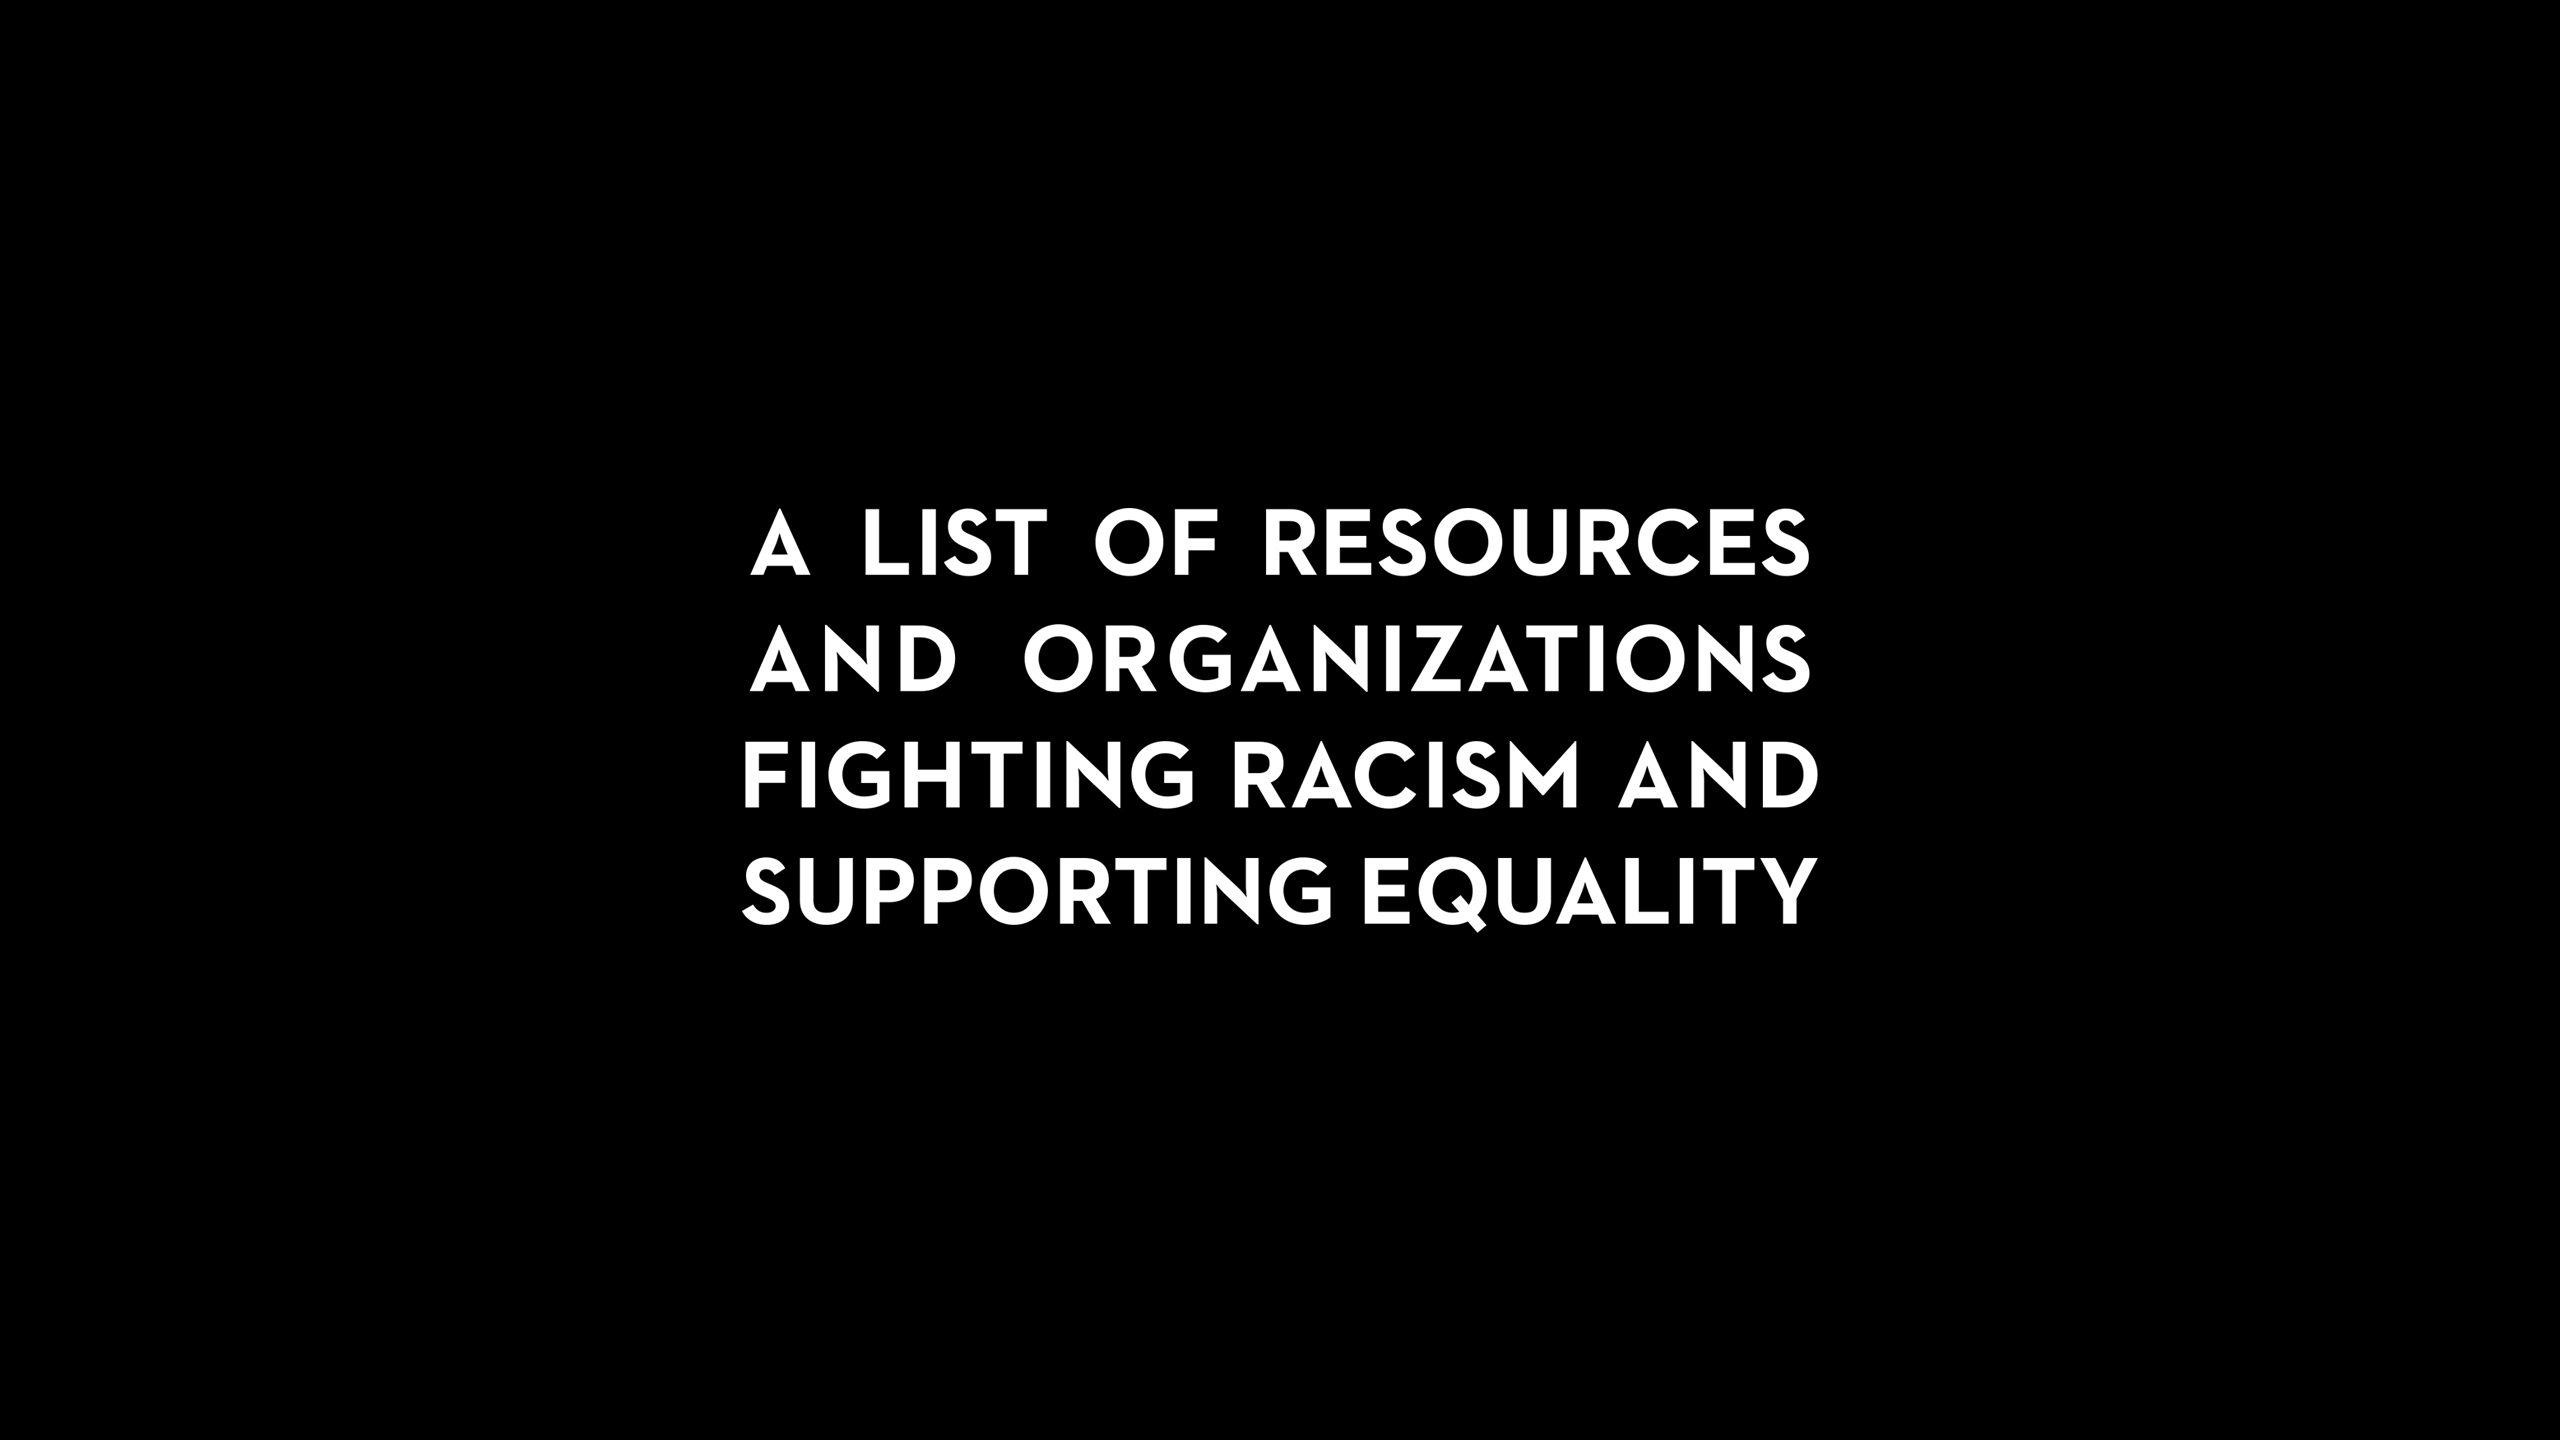 Featured Image for A List of Resources and Organizations Fighting Racism and Supporting Equality.